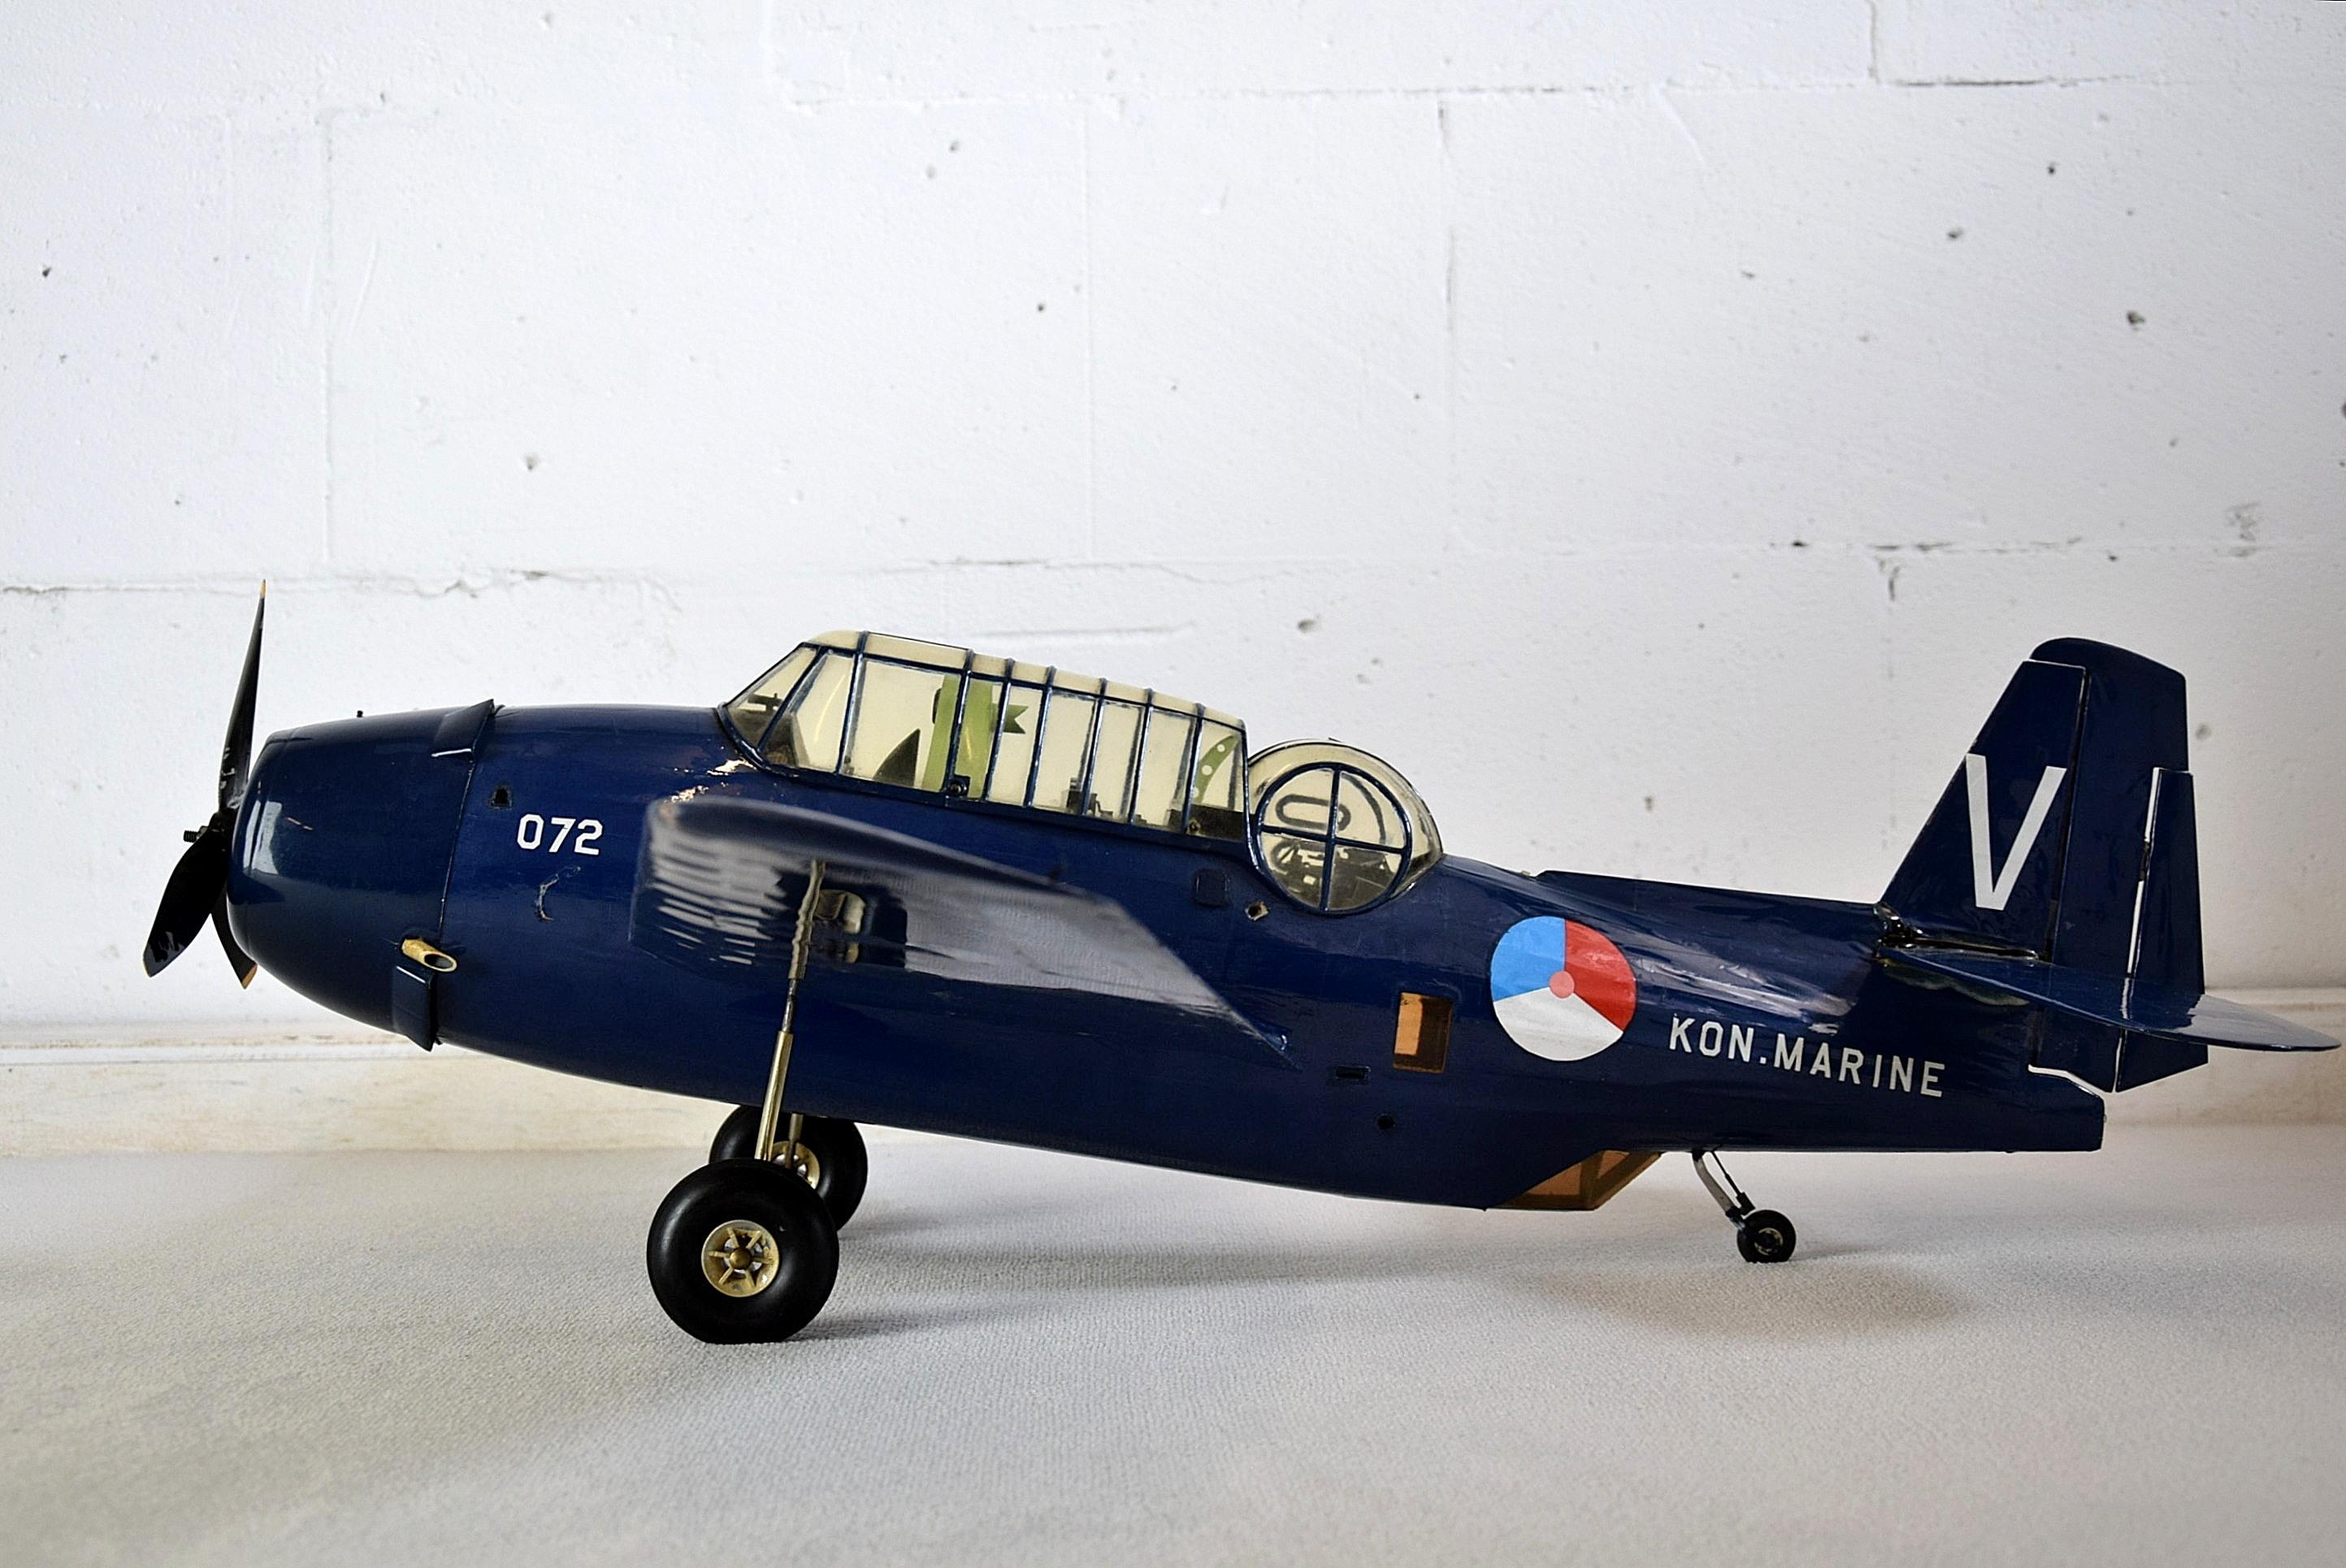 Big and beautiful 1960 Grumman Avenger TBM3 Royal Dutch Navy airplane model. This beautiful replica once flew with remote control and it comes without remote control. It has not been tested so we sell it as decorative item.
The Grumman TBF Avenger